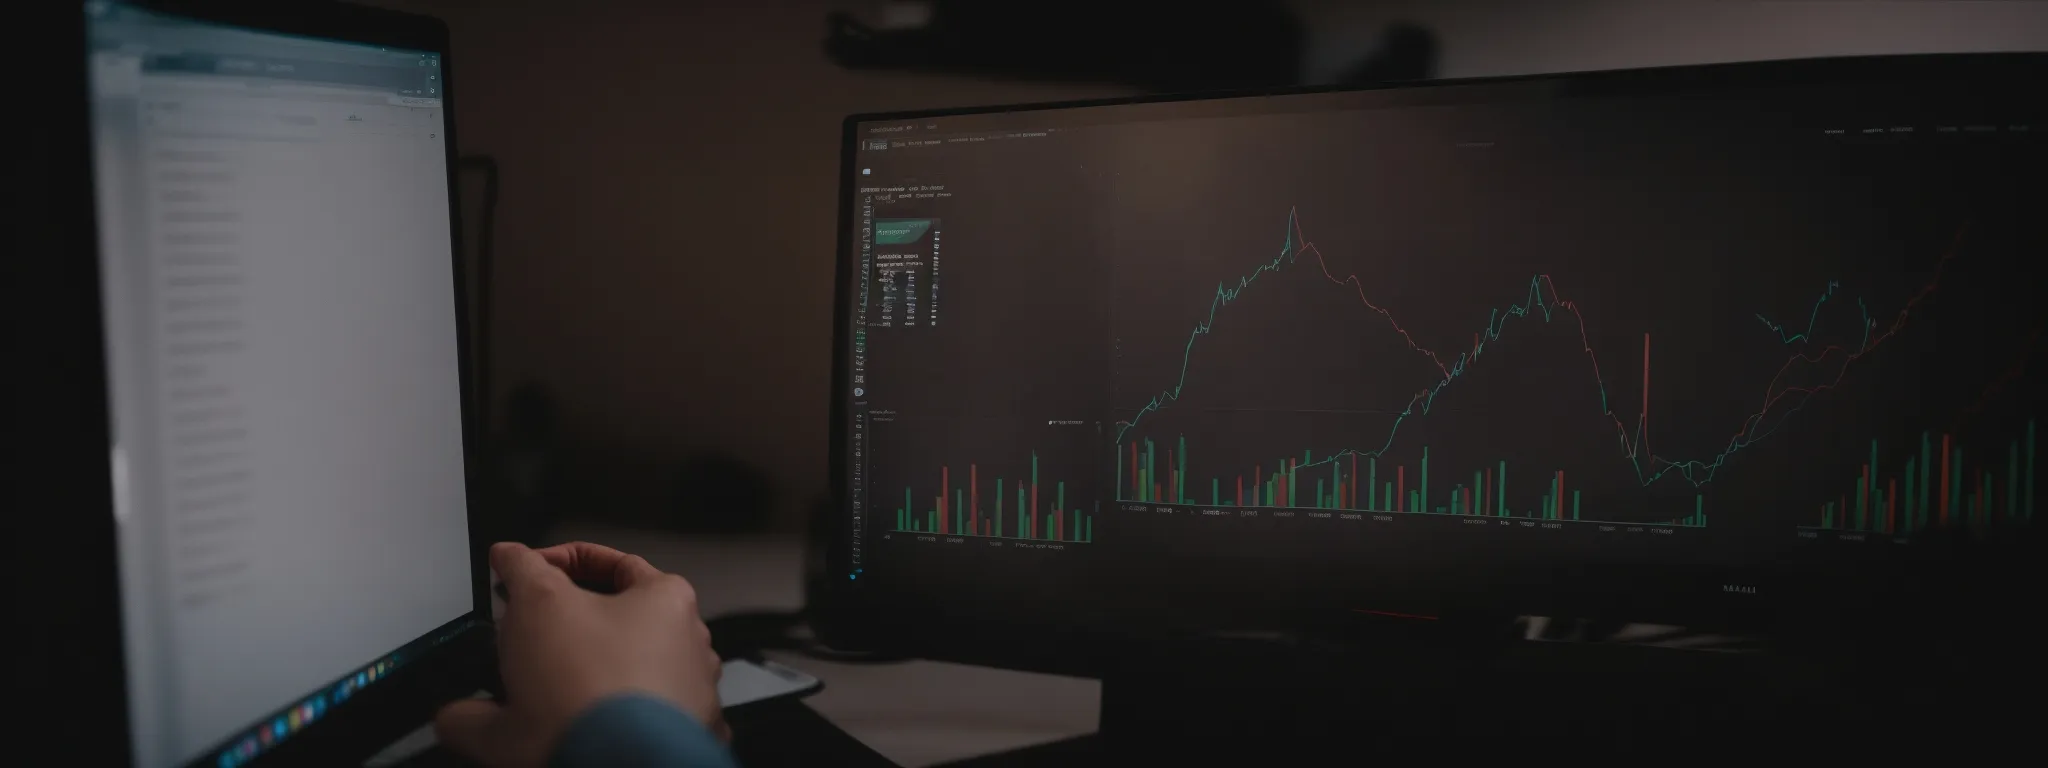 a person sitting at a computer, analyzing a graph-heavy dashboard on seo tracking software.